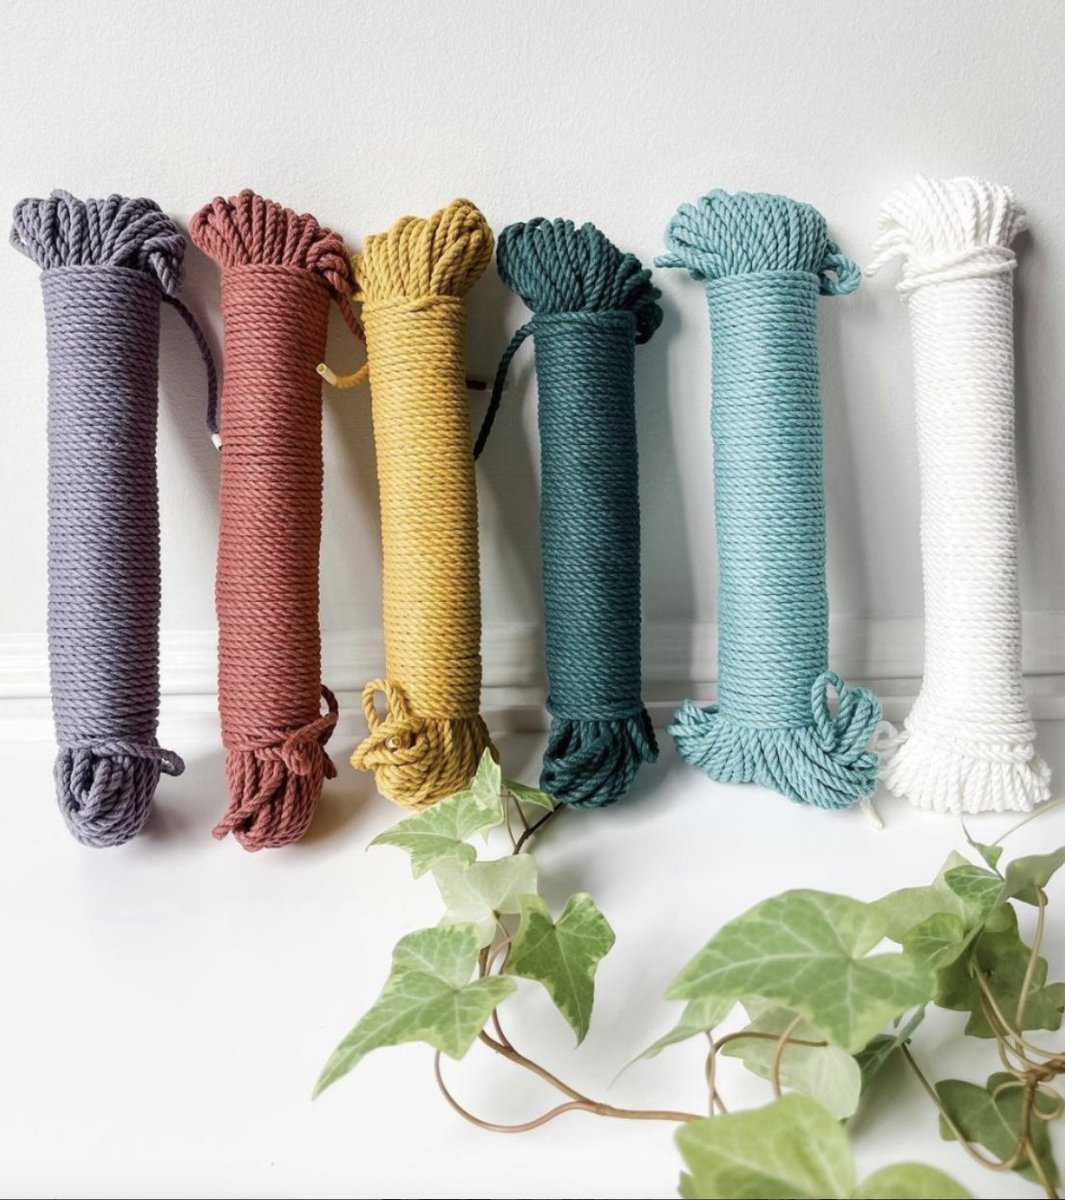 What colour of dip-dyed 100% cotton rope is your favourite? 
💜❤️💛💚💙🤍 
From left to right: charcoal, marsala, mustard, forest, soft teal and white snow.

📸 [IG] .chic_macrame_art

#modernmacrame #fiberart #macramemovement